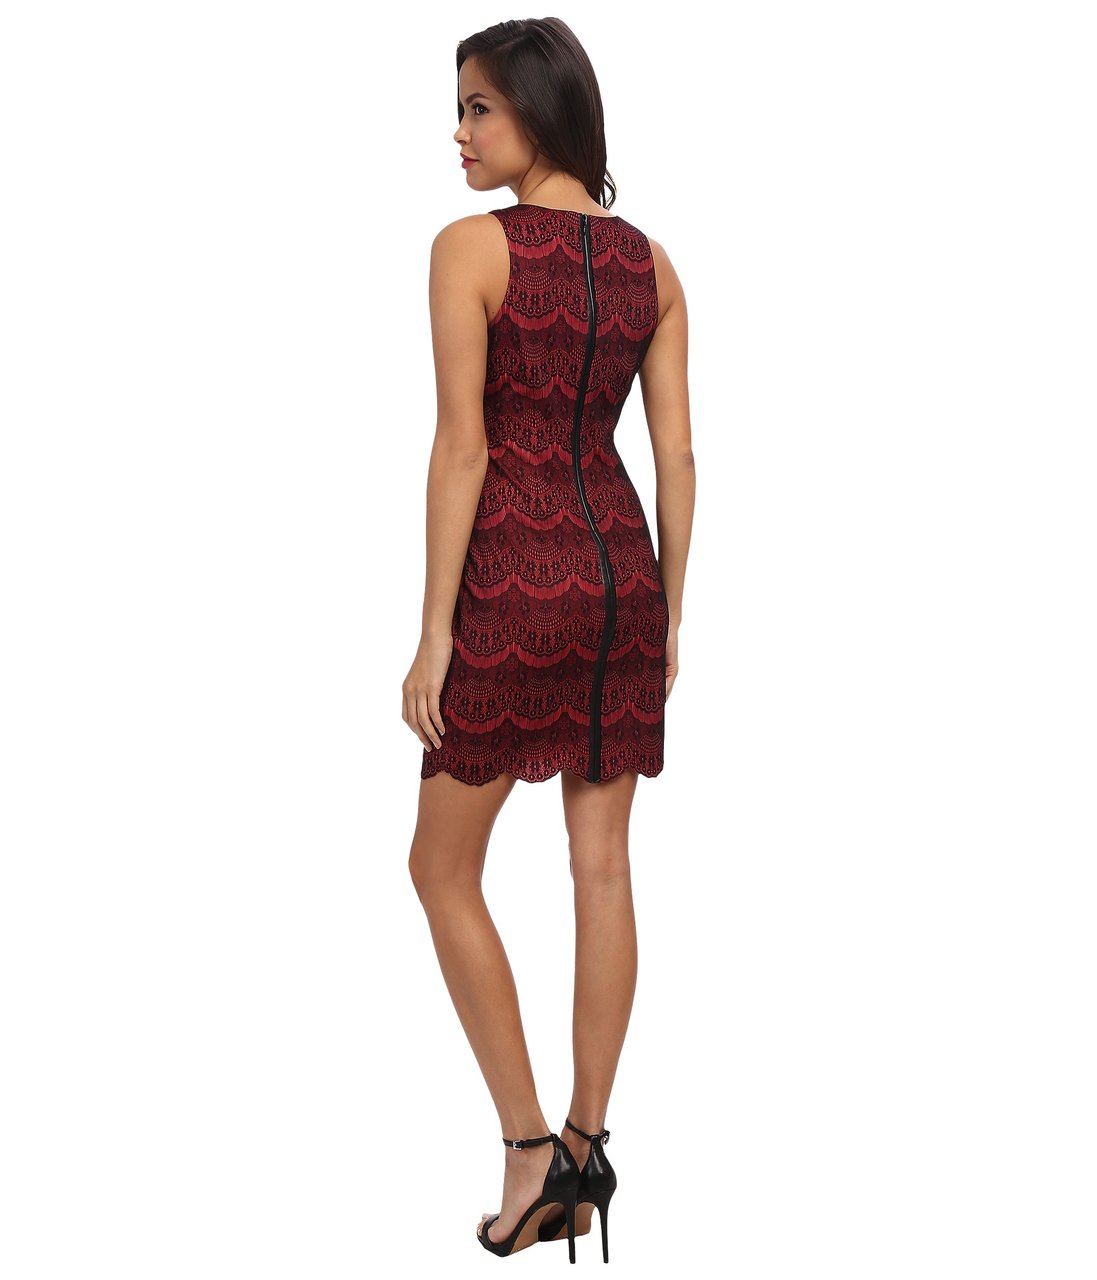 Jessica Simpson - JS4P6482 Scalloped Lace Sheath Dress in Red